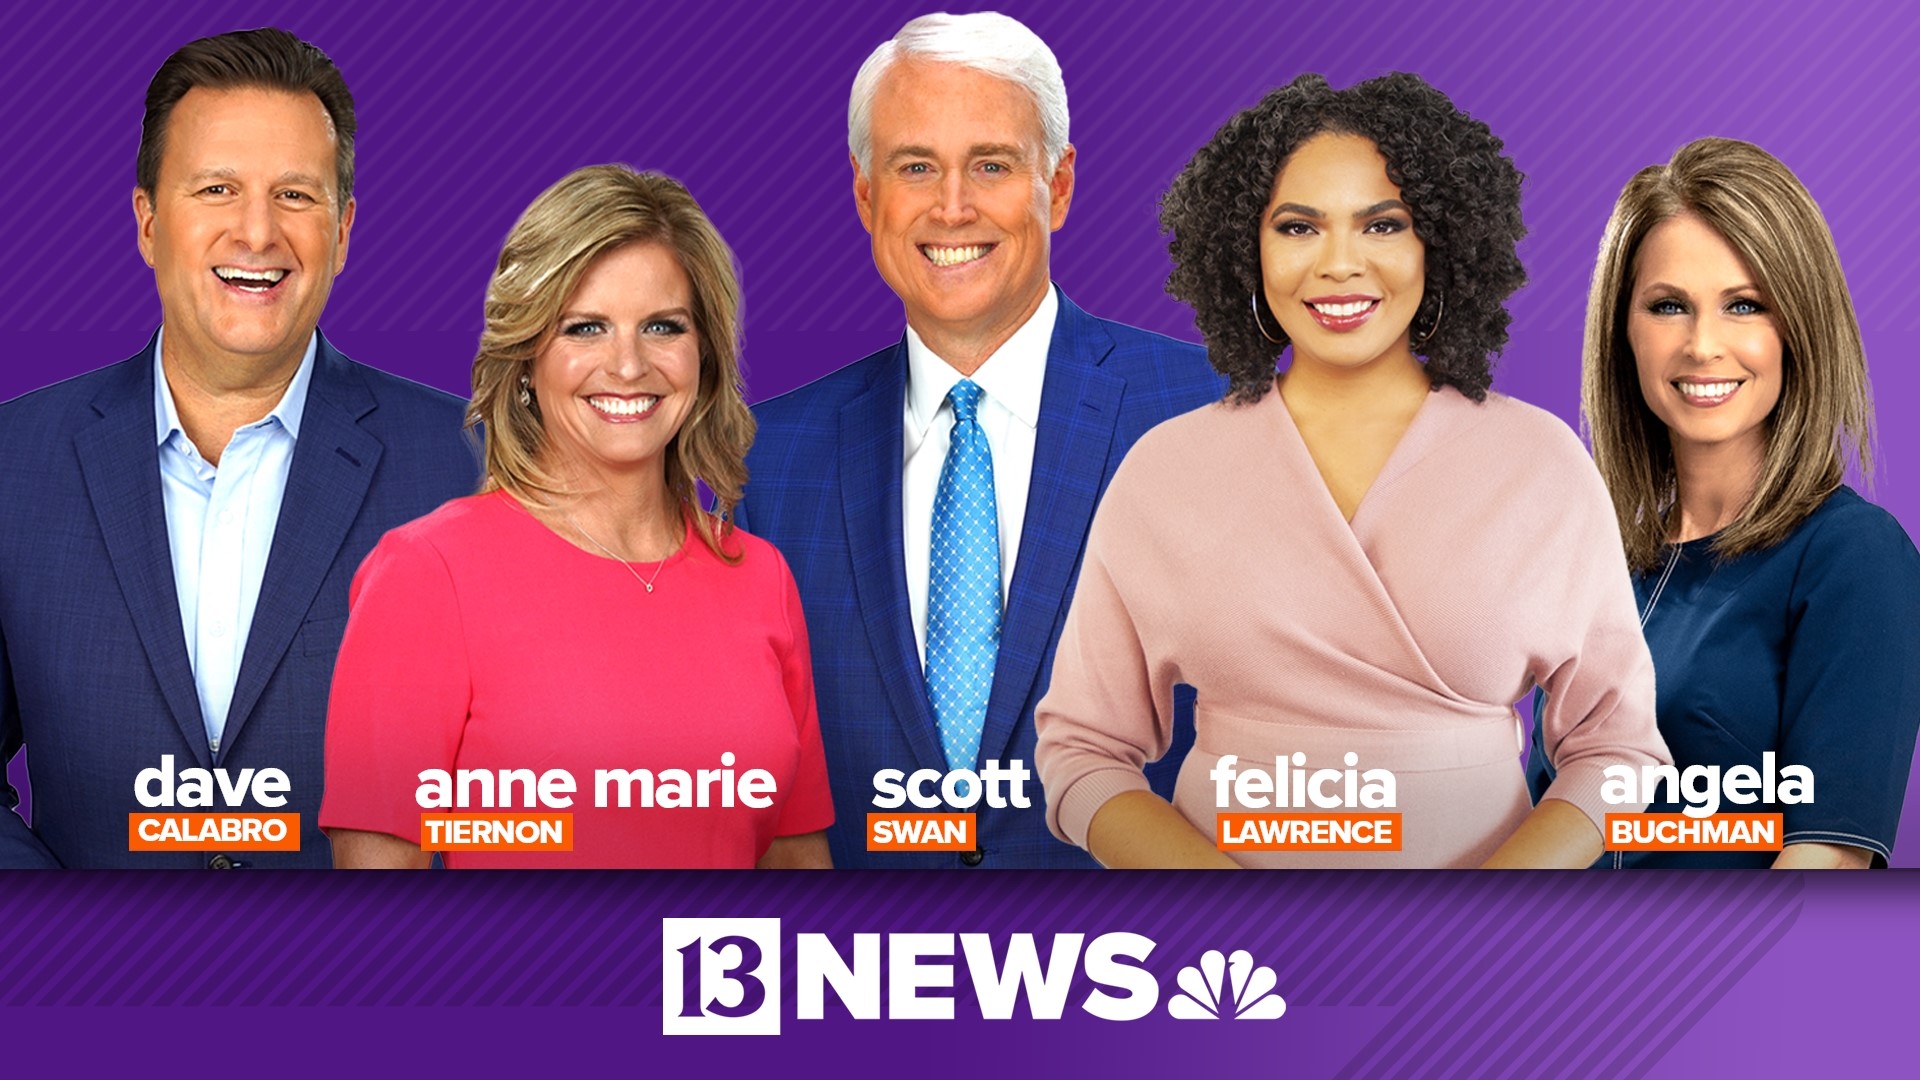 Join 13News for the latest news from Indianapolis and around the world, including in-depth coverage of the biggest story of the day and your weather forecast.